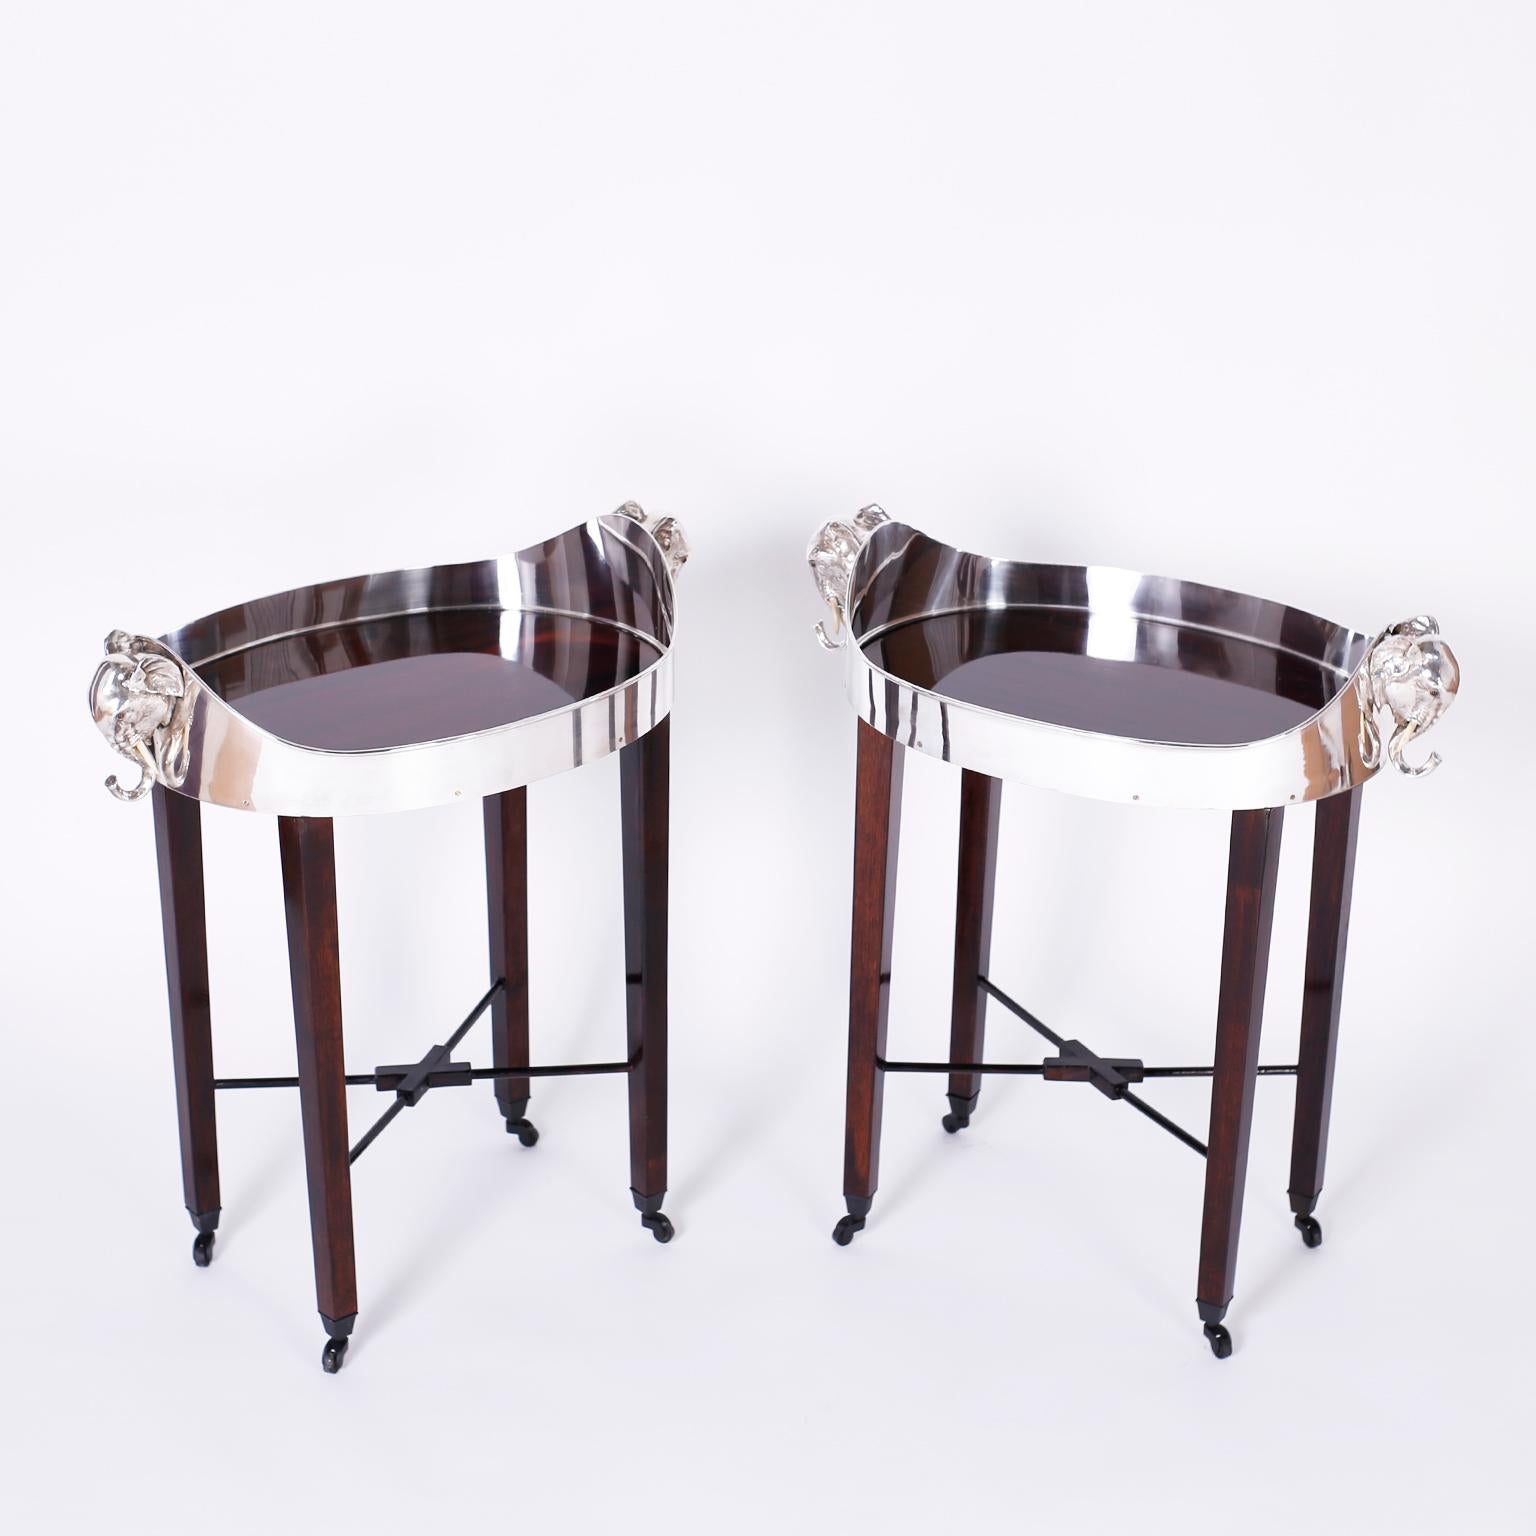 Impressive pair of vintage British colonial style trays presented on contemporary legs, featuring vintage silvered metal galleries with elephant head handles around a mahogany surface. The mahogany elegant tapered legs have cross stretchers and are